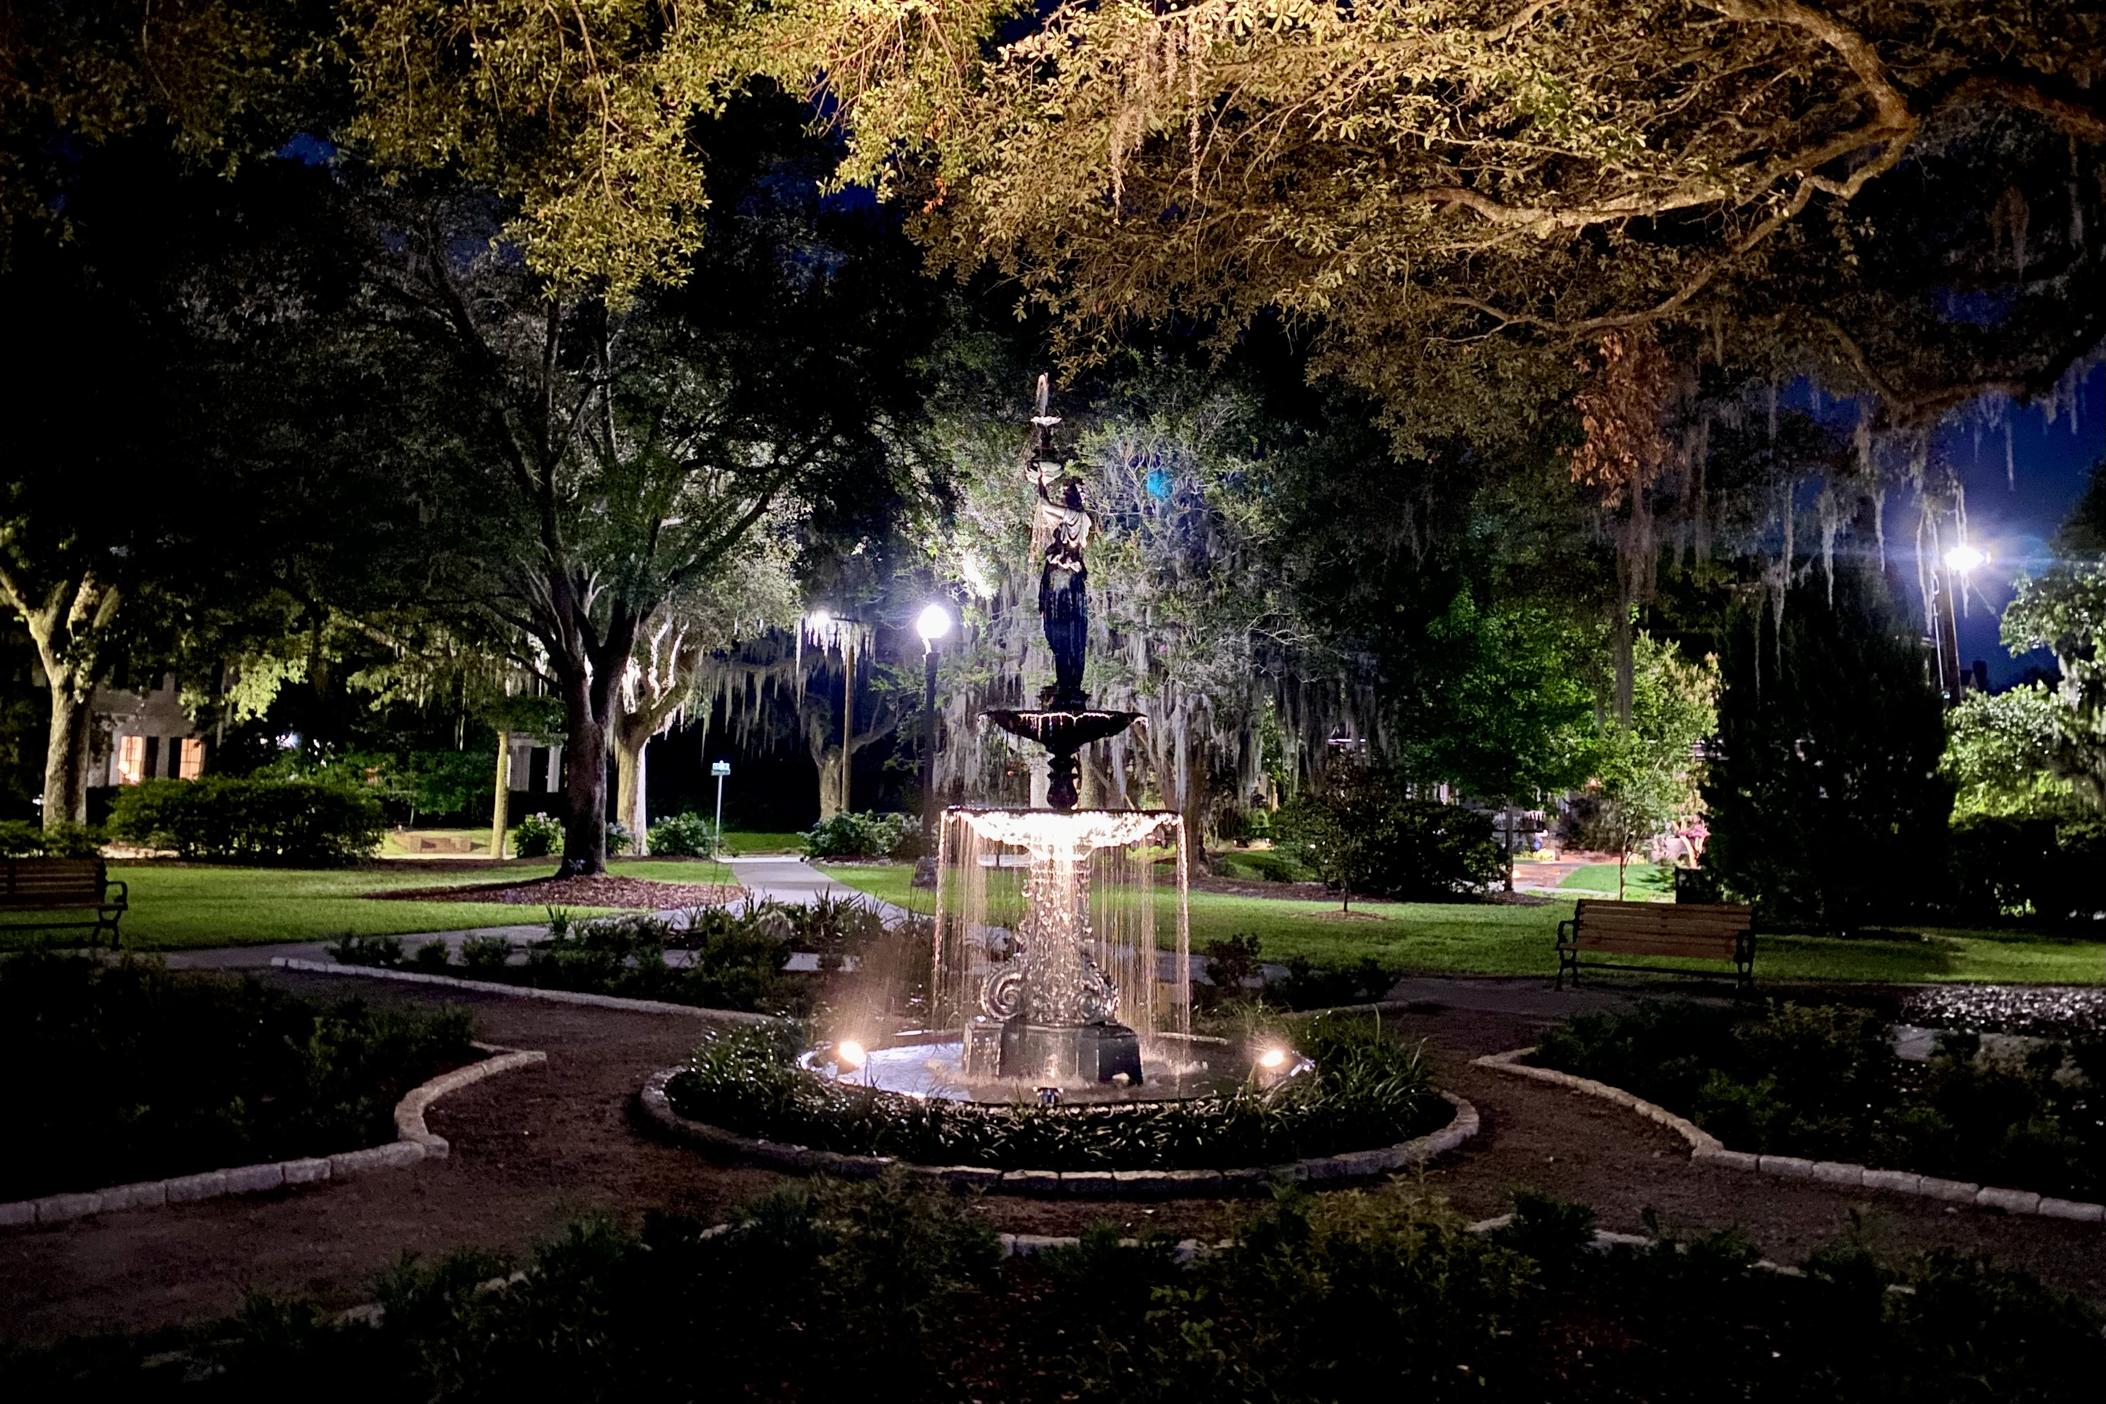 When lit up at night, “The Garden Keeper” fountain at Kavanaugh Park casts an enchanting amber glow onto the live oak tree above.